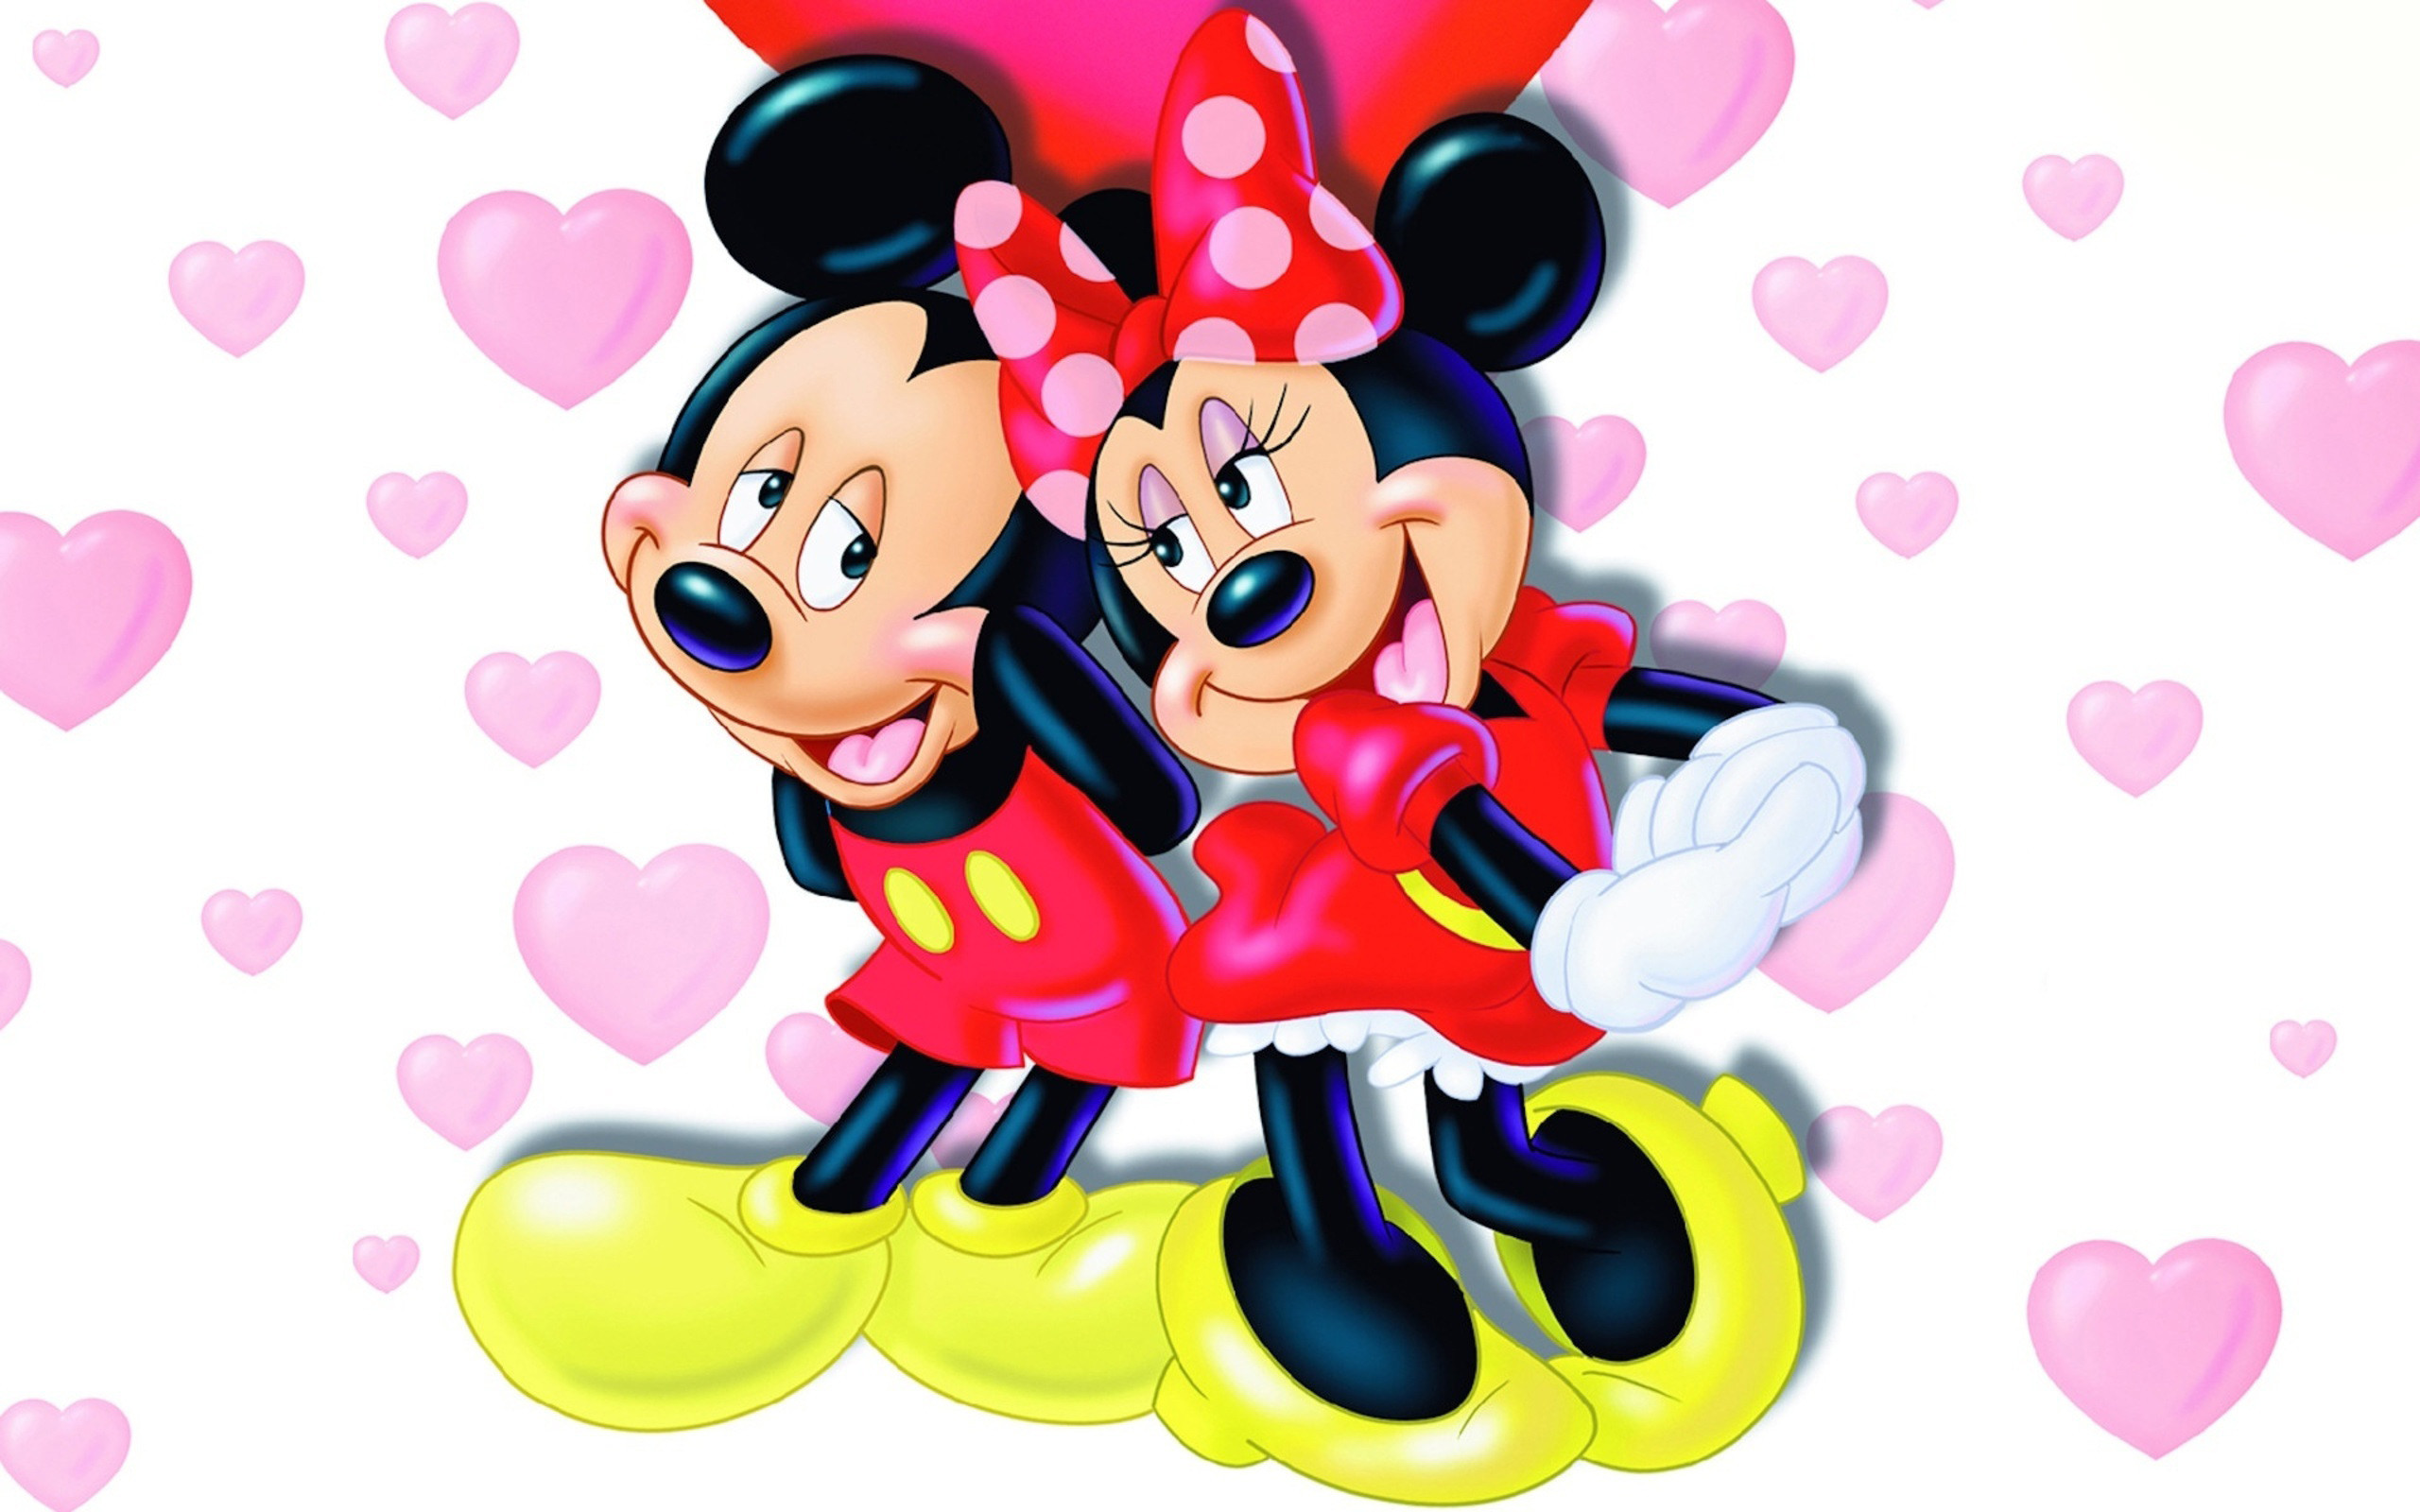 Download Minnie Mouse Wallpaper  Mickey mouse wallpaper Minnie mouse  background Minnie mouse images